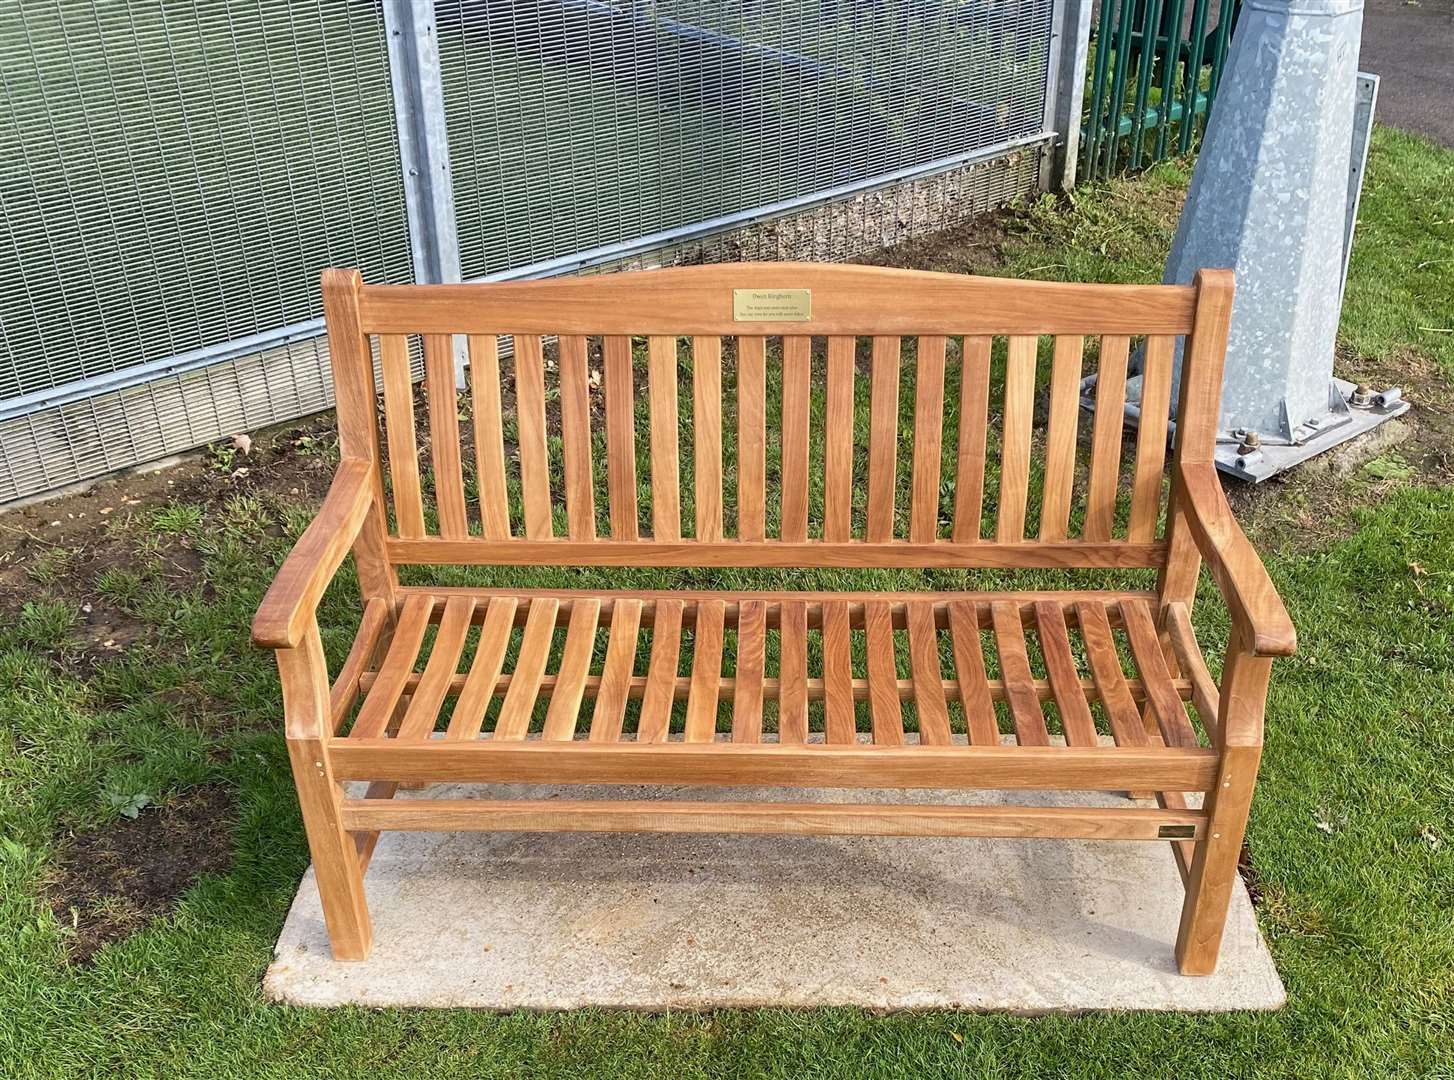 Another memorial bench was installed at Towers School in Owen's memory